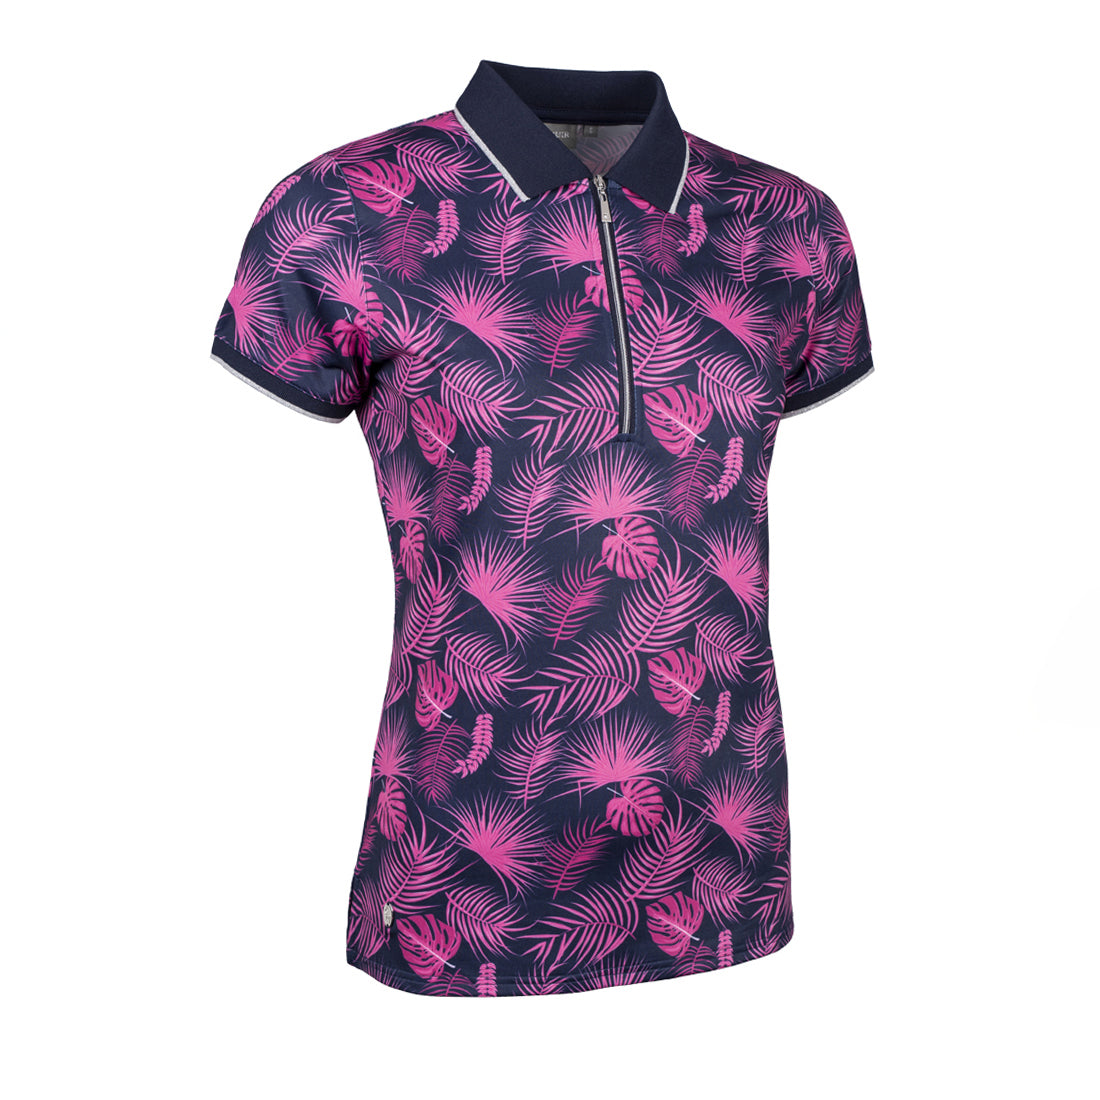 Glenmuir Short Sleeve Polo with UV 50+ in Navy & Hot Pink Tropical Print